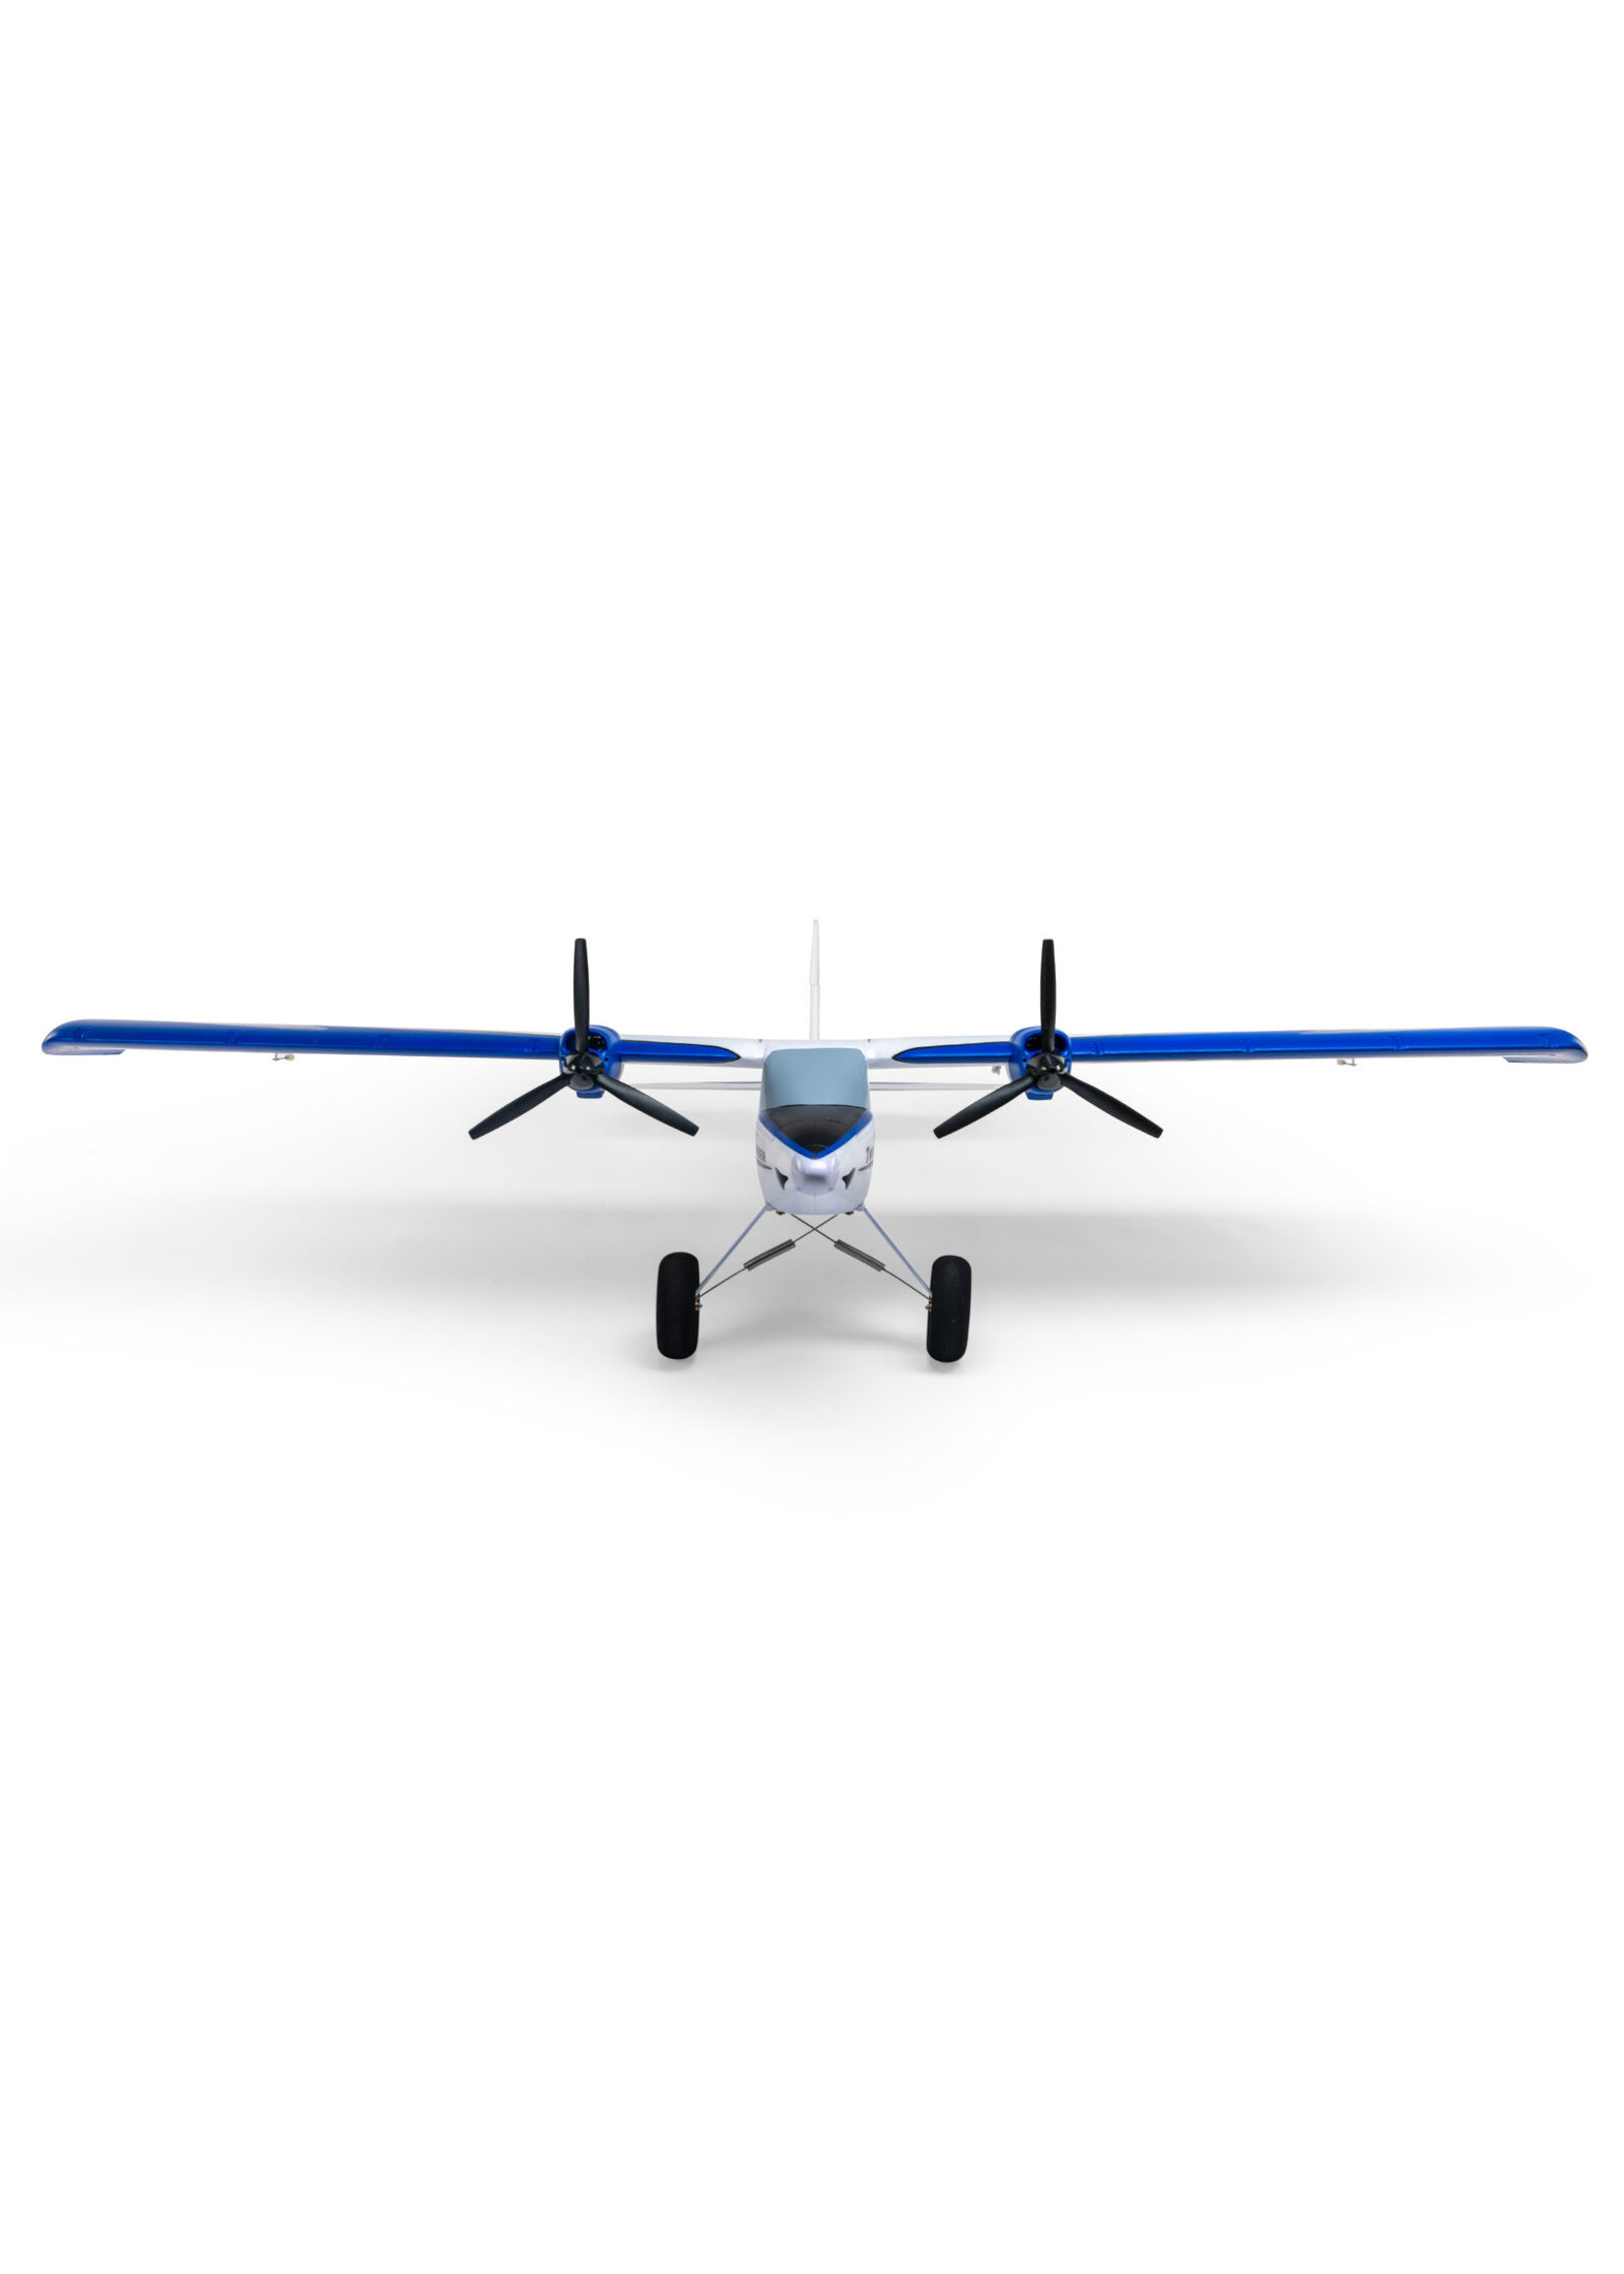 E-flite EFL23850 - Twin Timber 1.6m with BNF-B